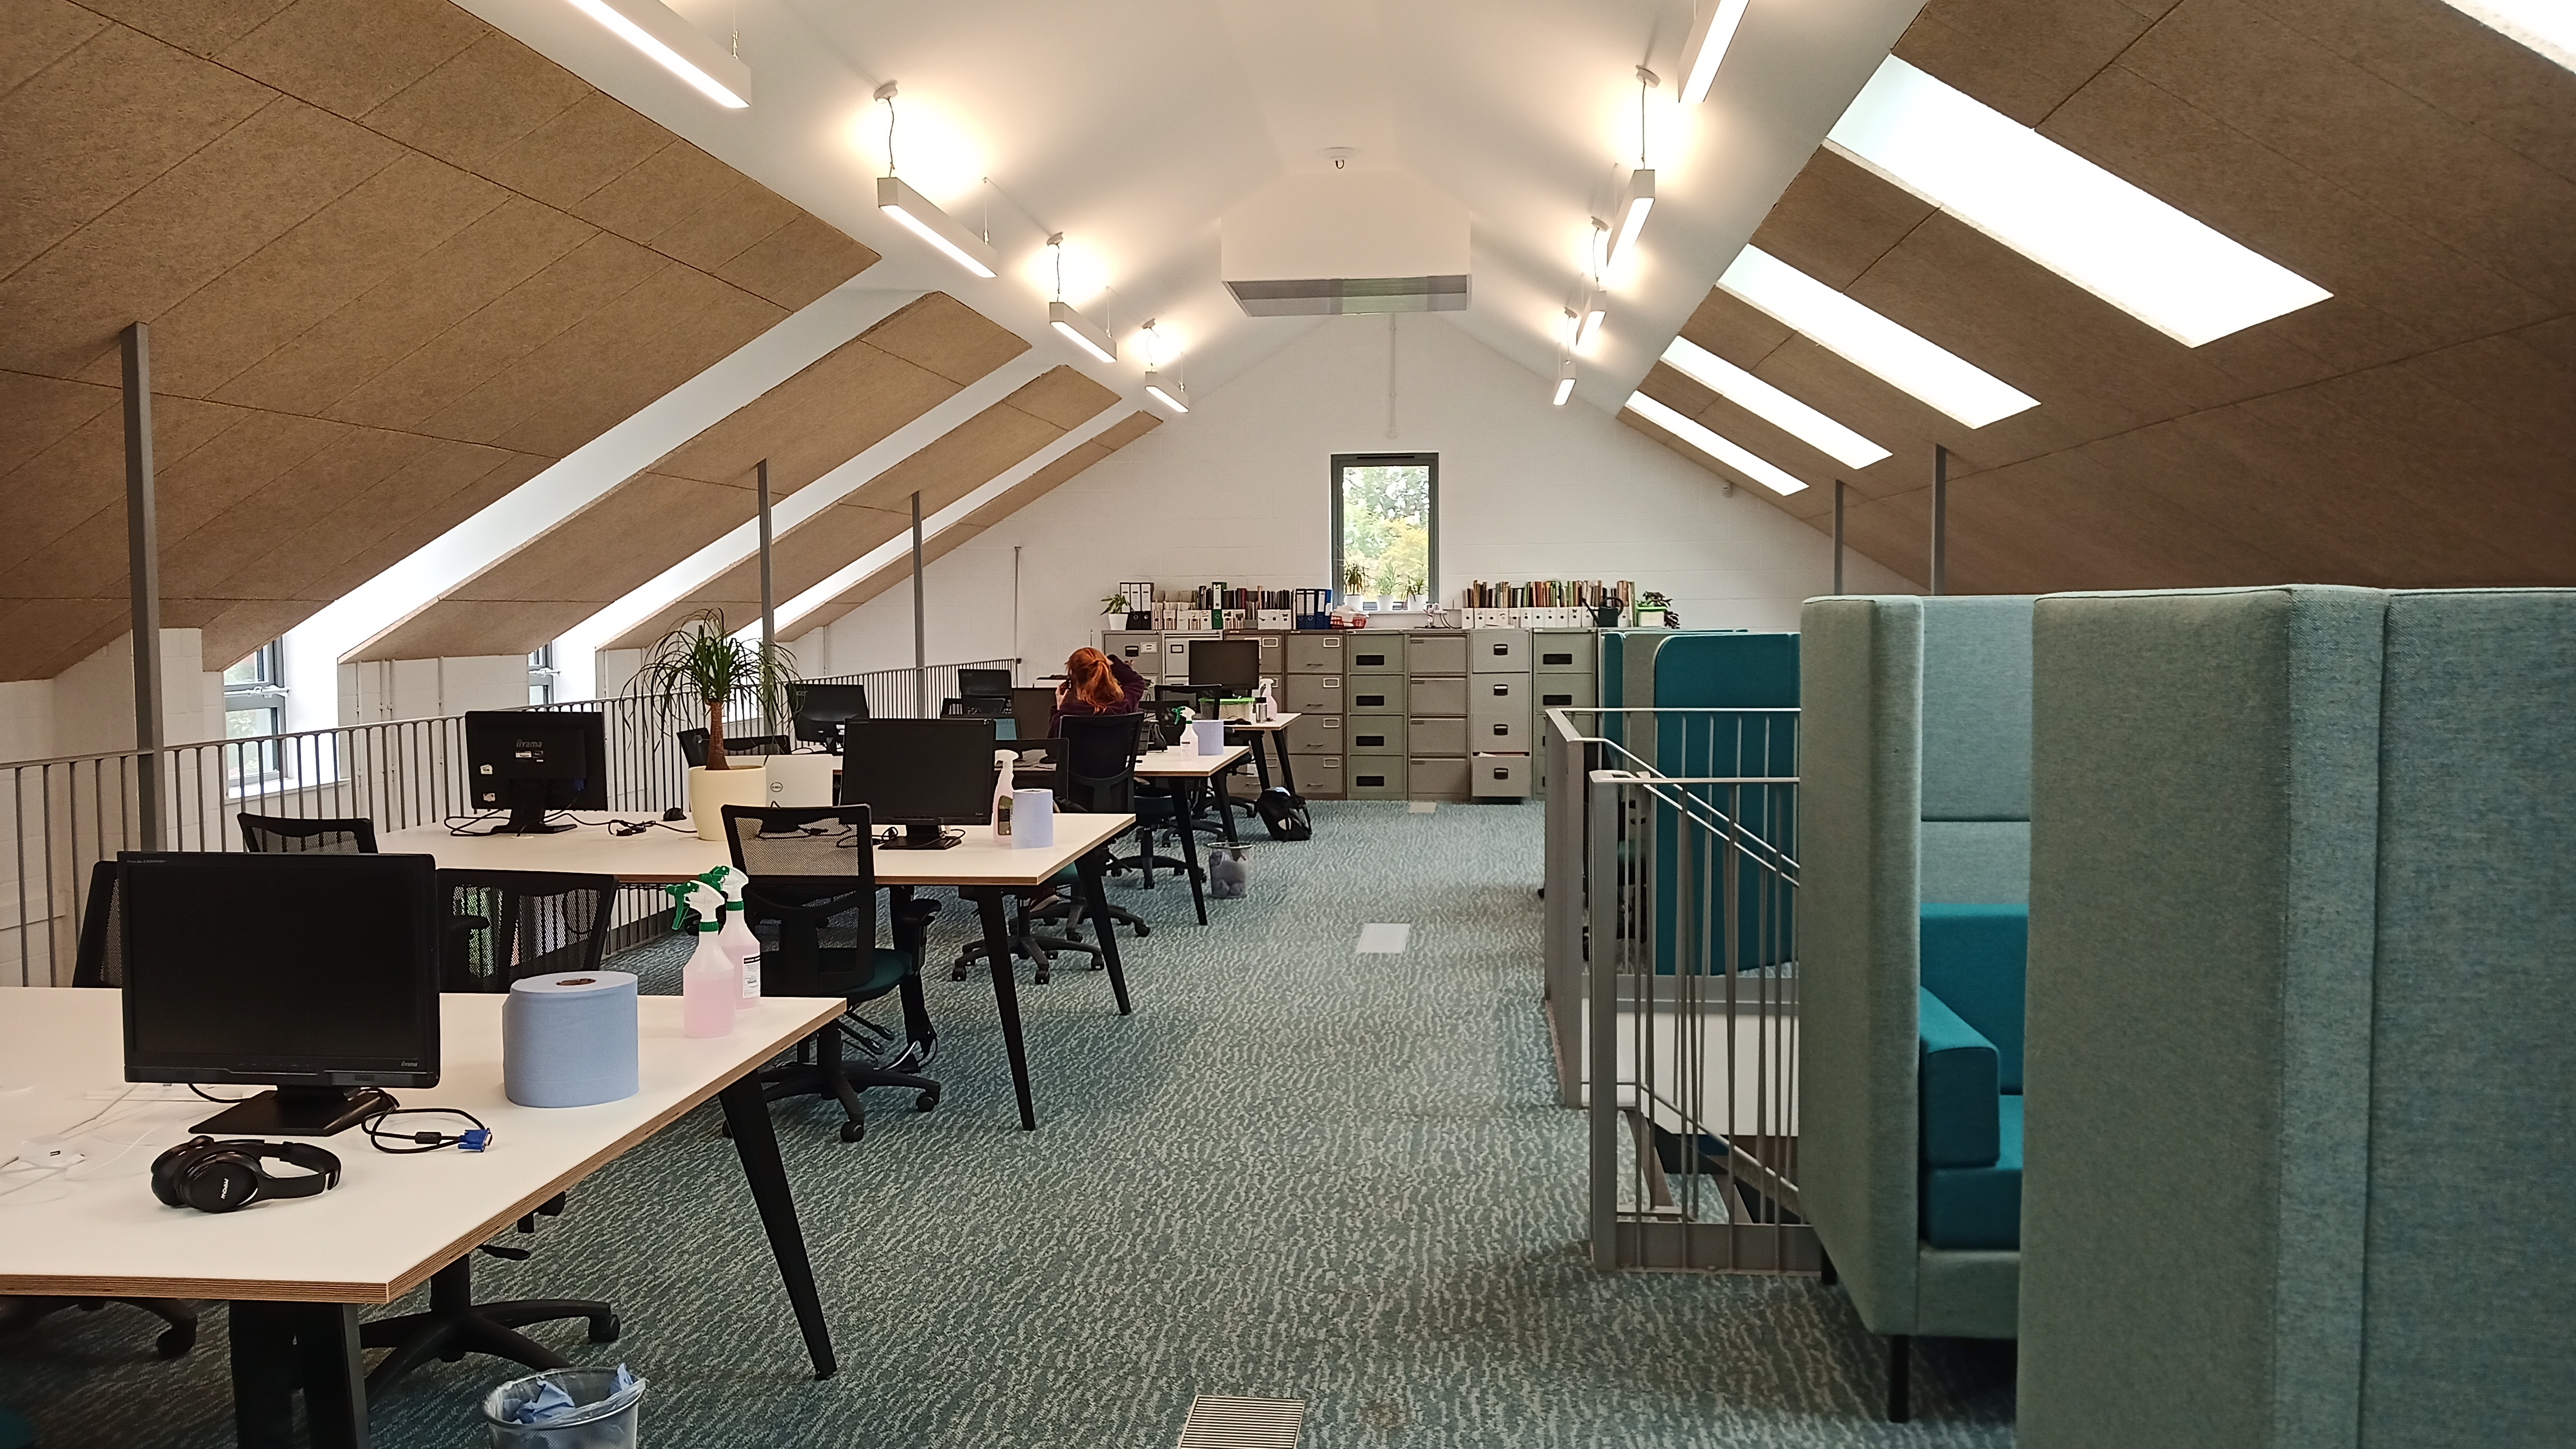 Newly refurbished mezzanine office at Robinswood Hill Country Park